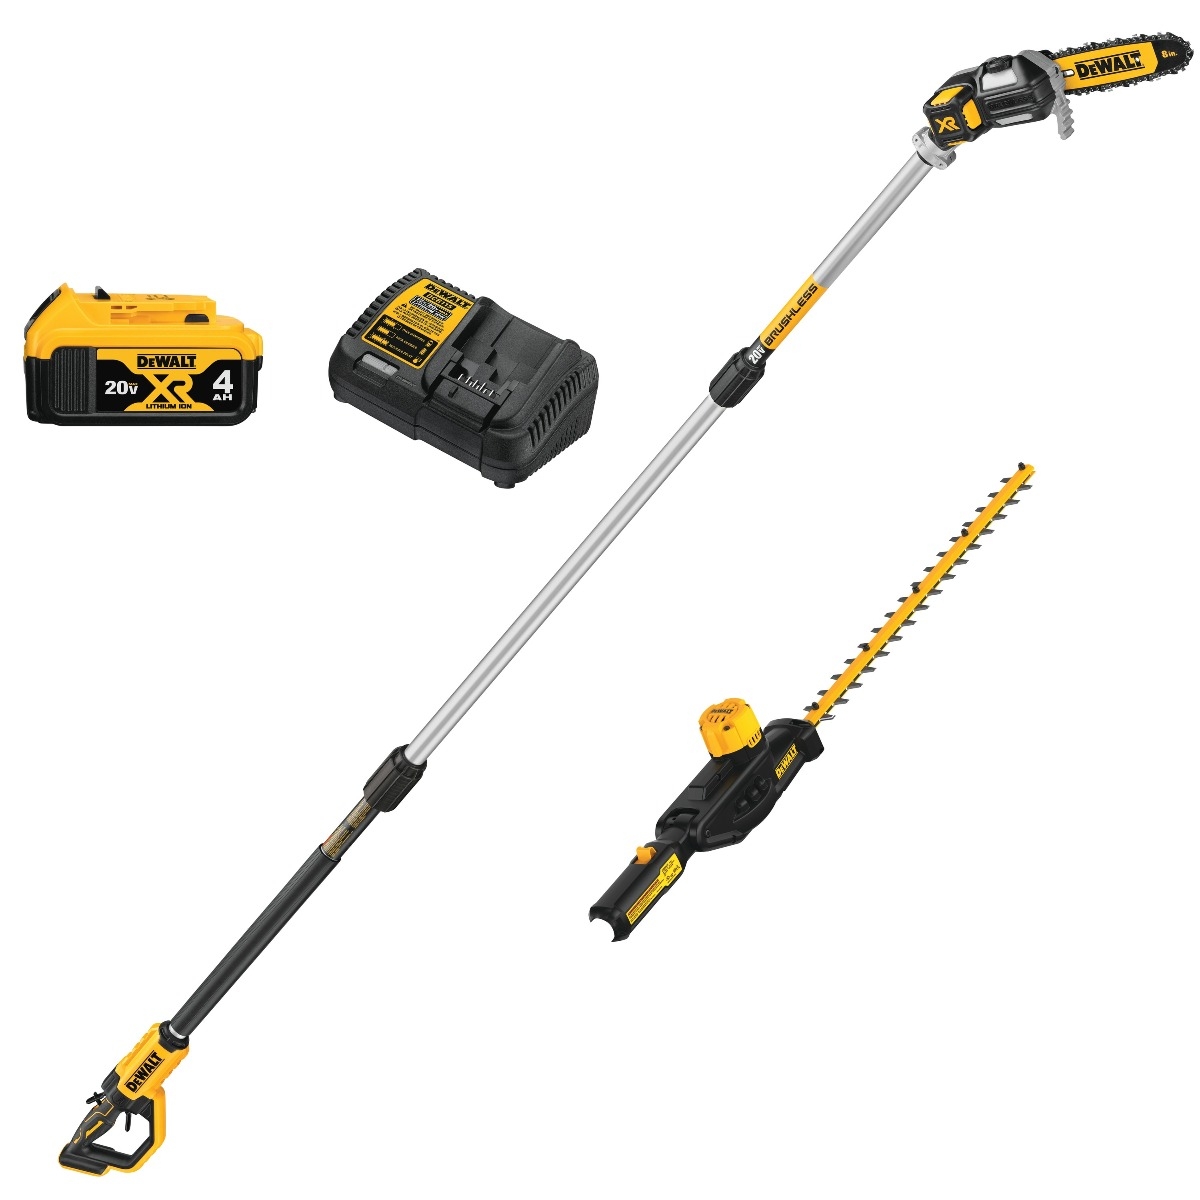 20V MAX 8in. Cordless Battery Powered Pole Saw, Tool Only